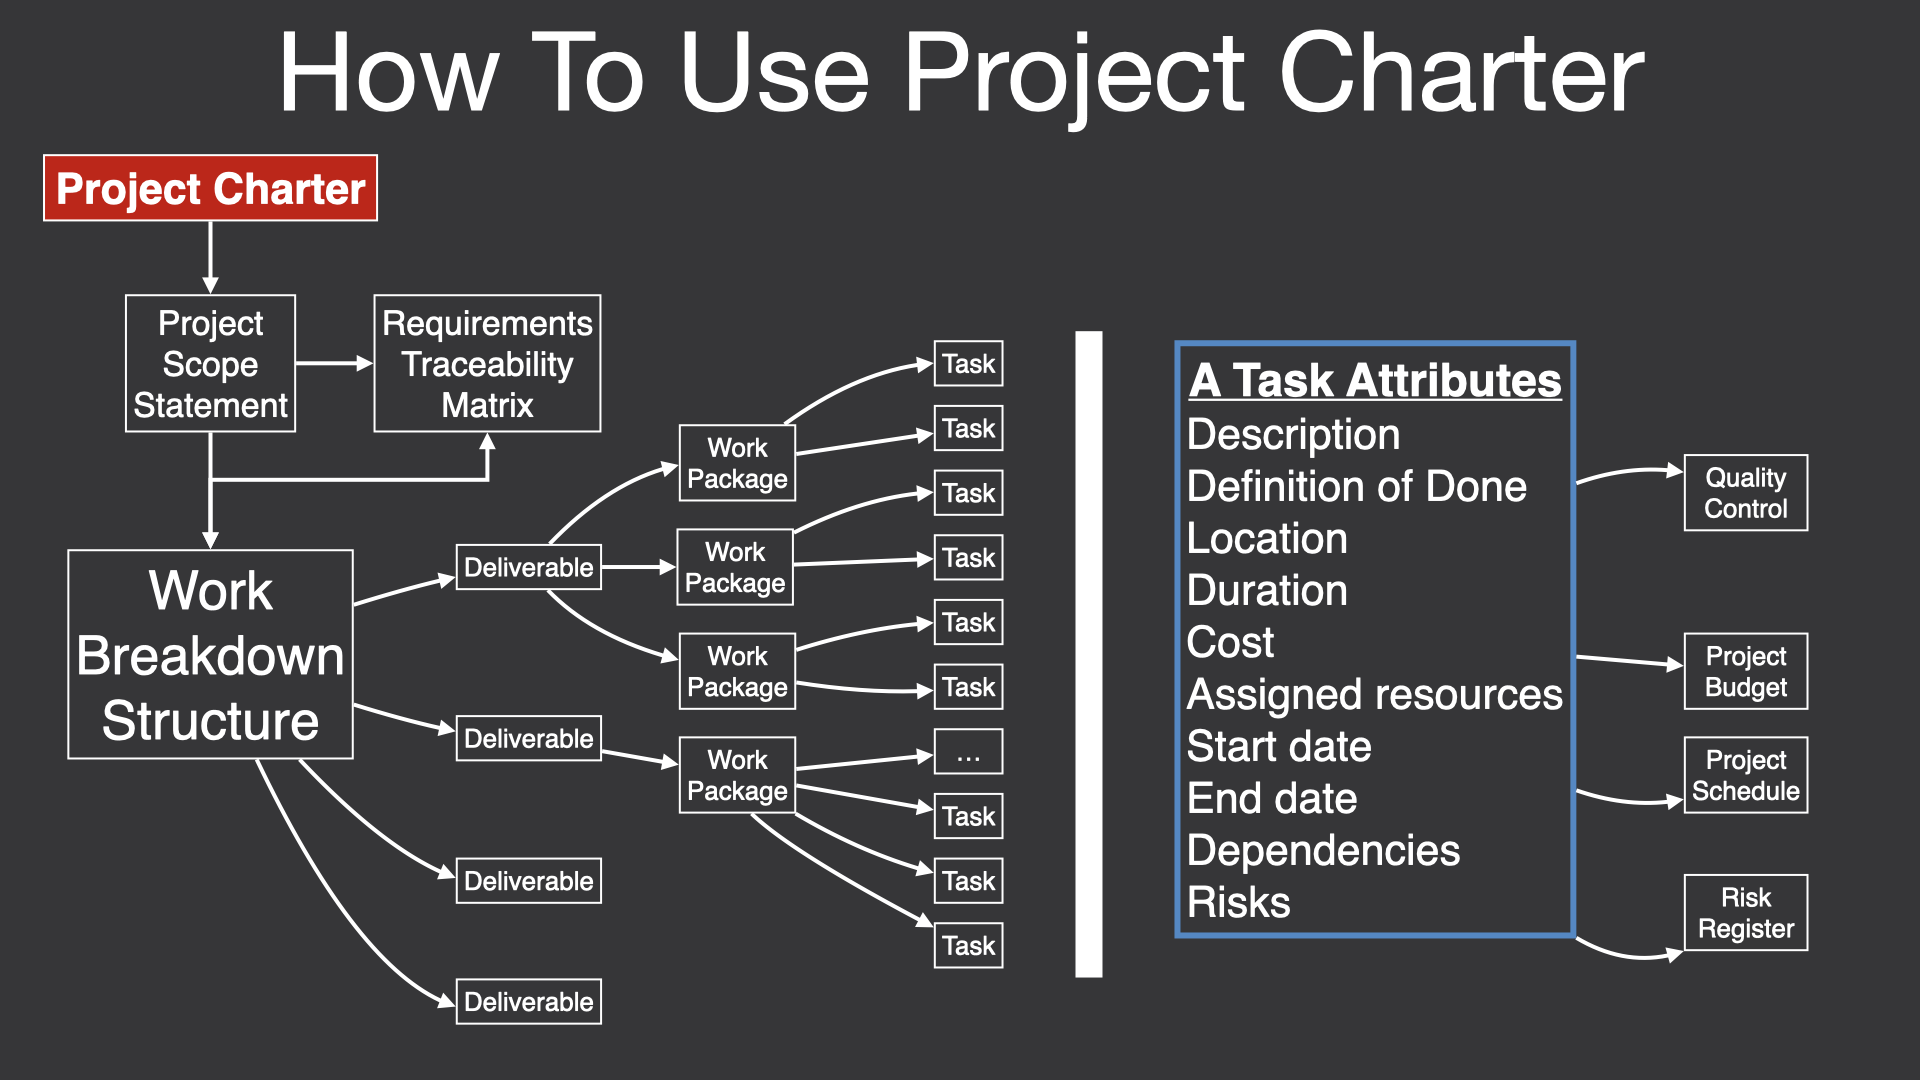 How to use project charters.